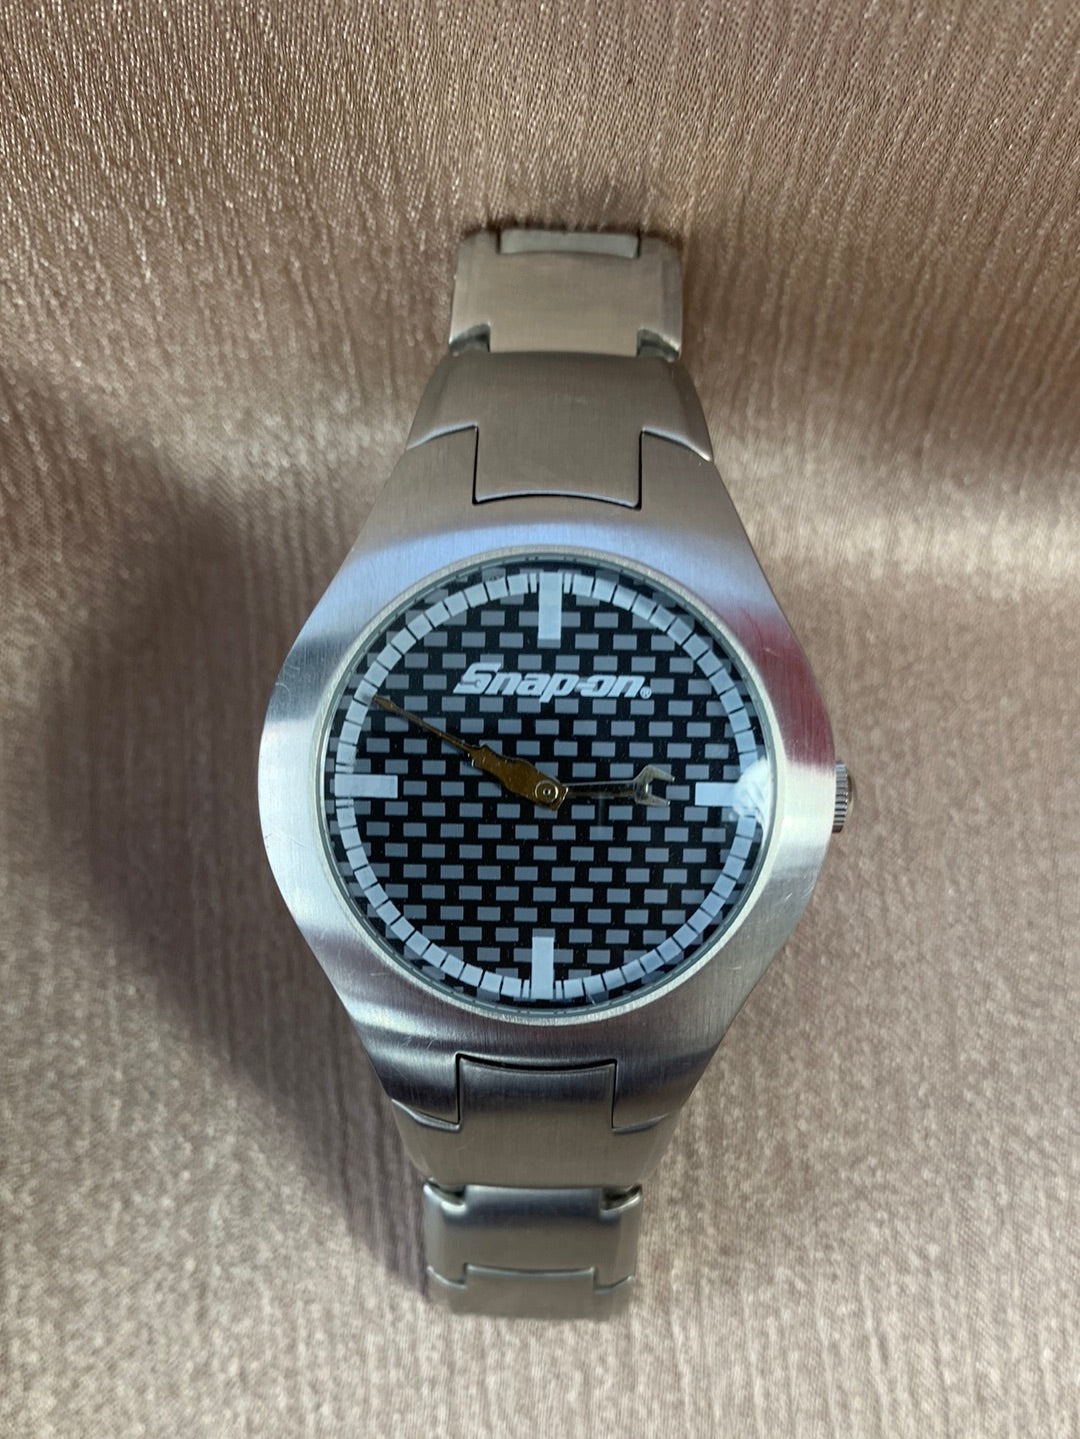 SNAP ON Brushed Stainless Steel Tool Hands 2008 Special Edition Watch